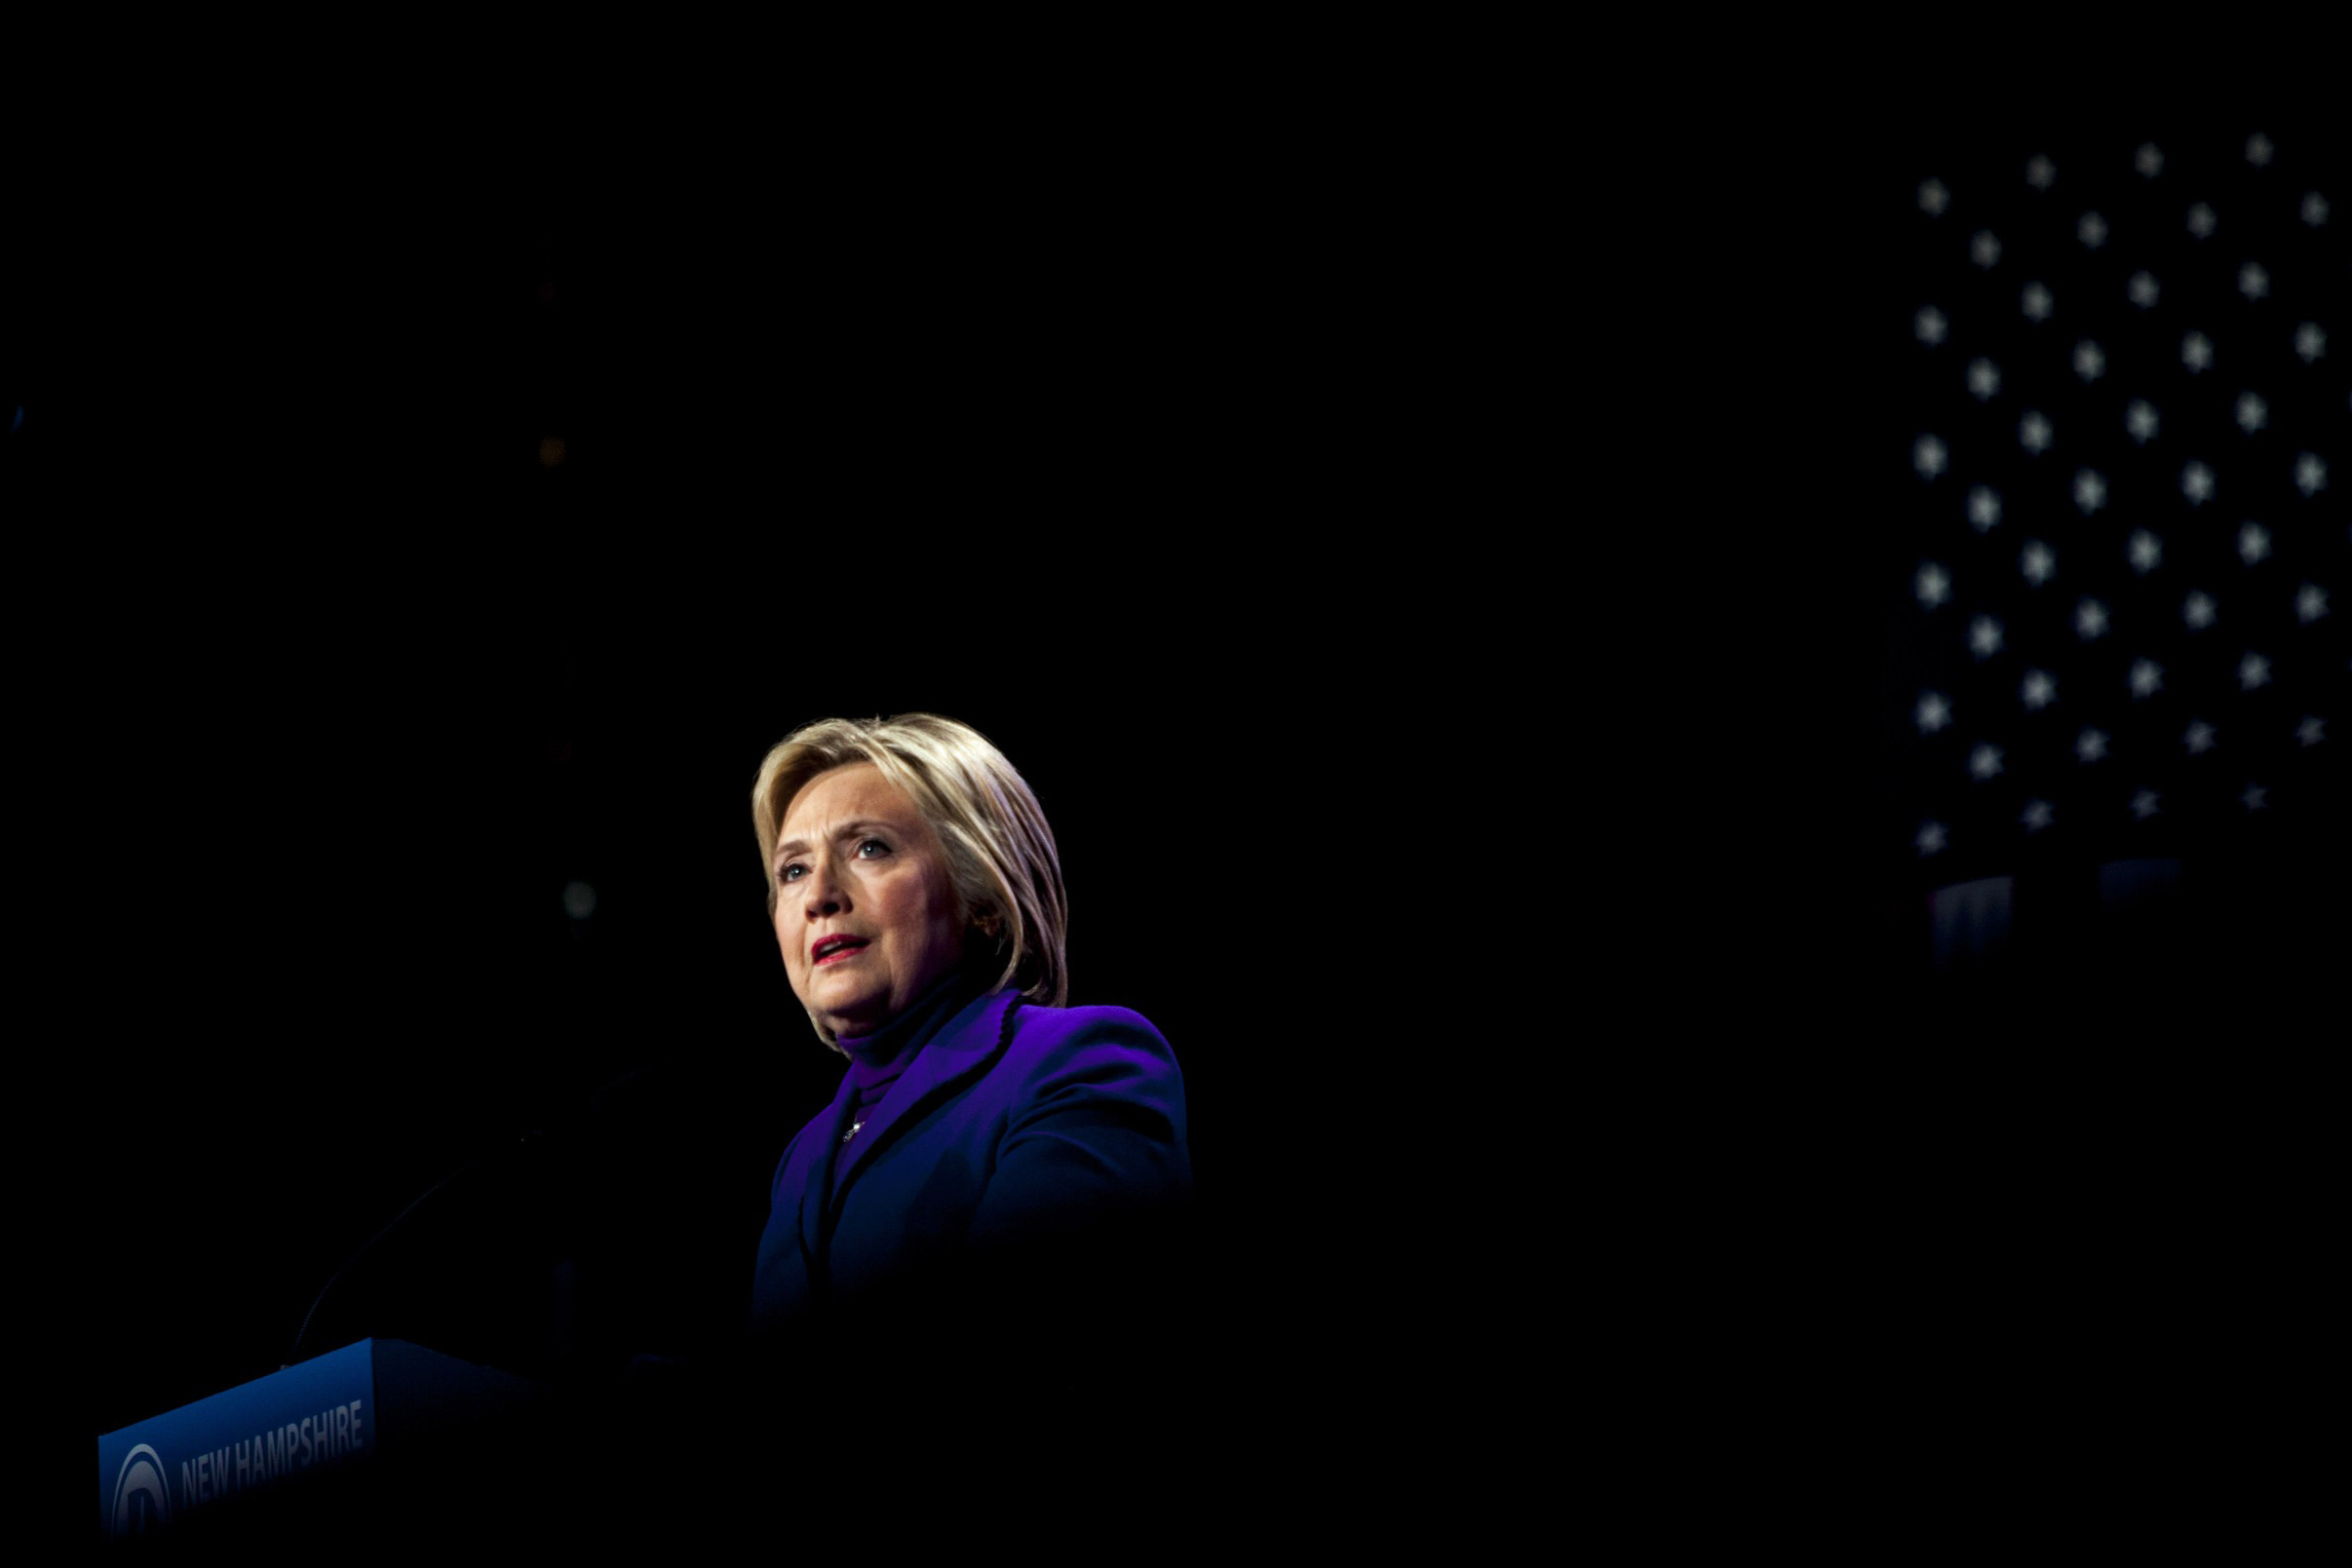 Democratic presidential candidate Hillary Clinton speaks at the McIntyre-Shaheen 100 Club Celebration in Manchester, N.H. on Feb. 5, 2016. (Natalie Keyssar for TIME)